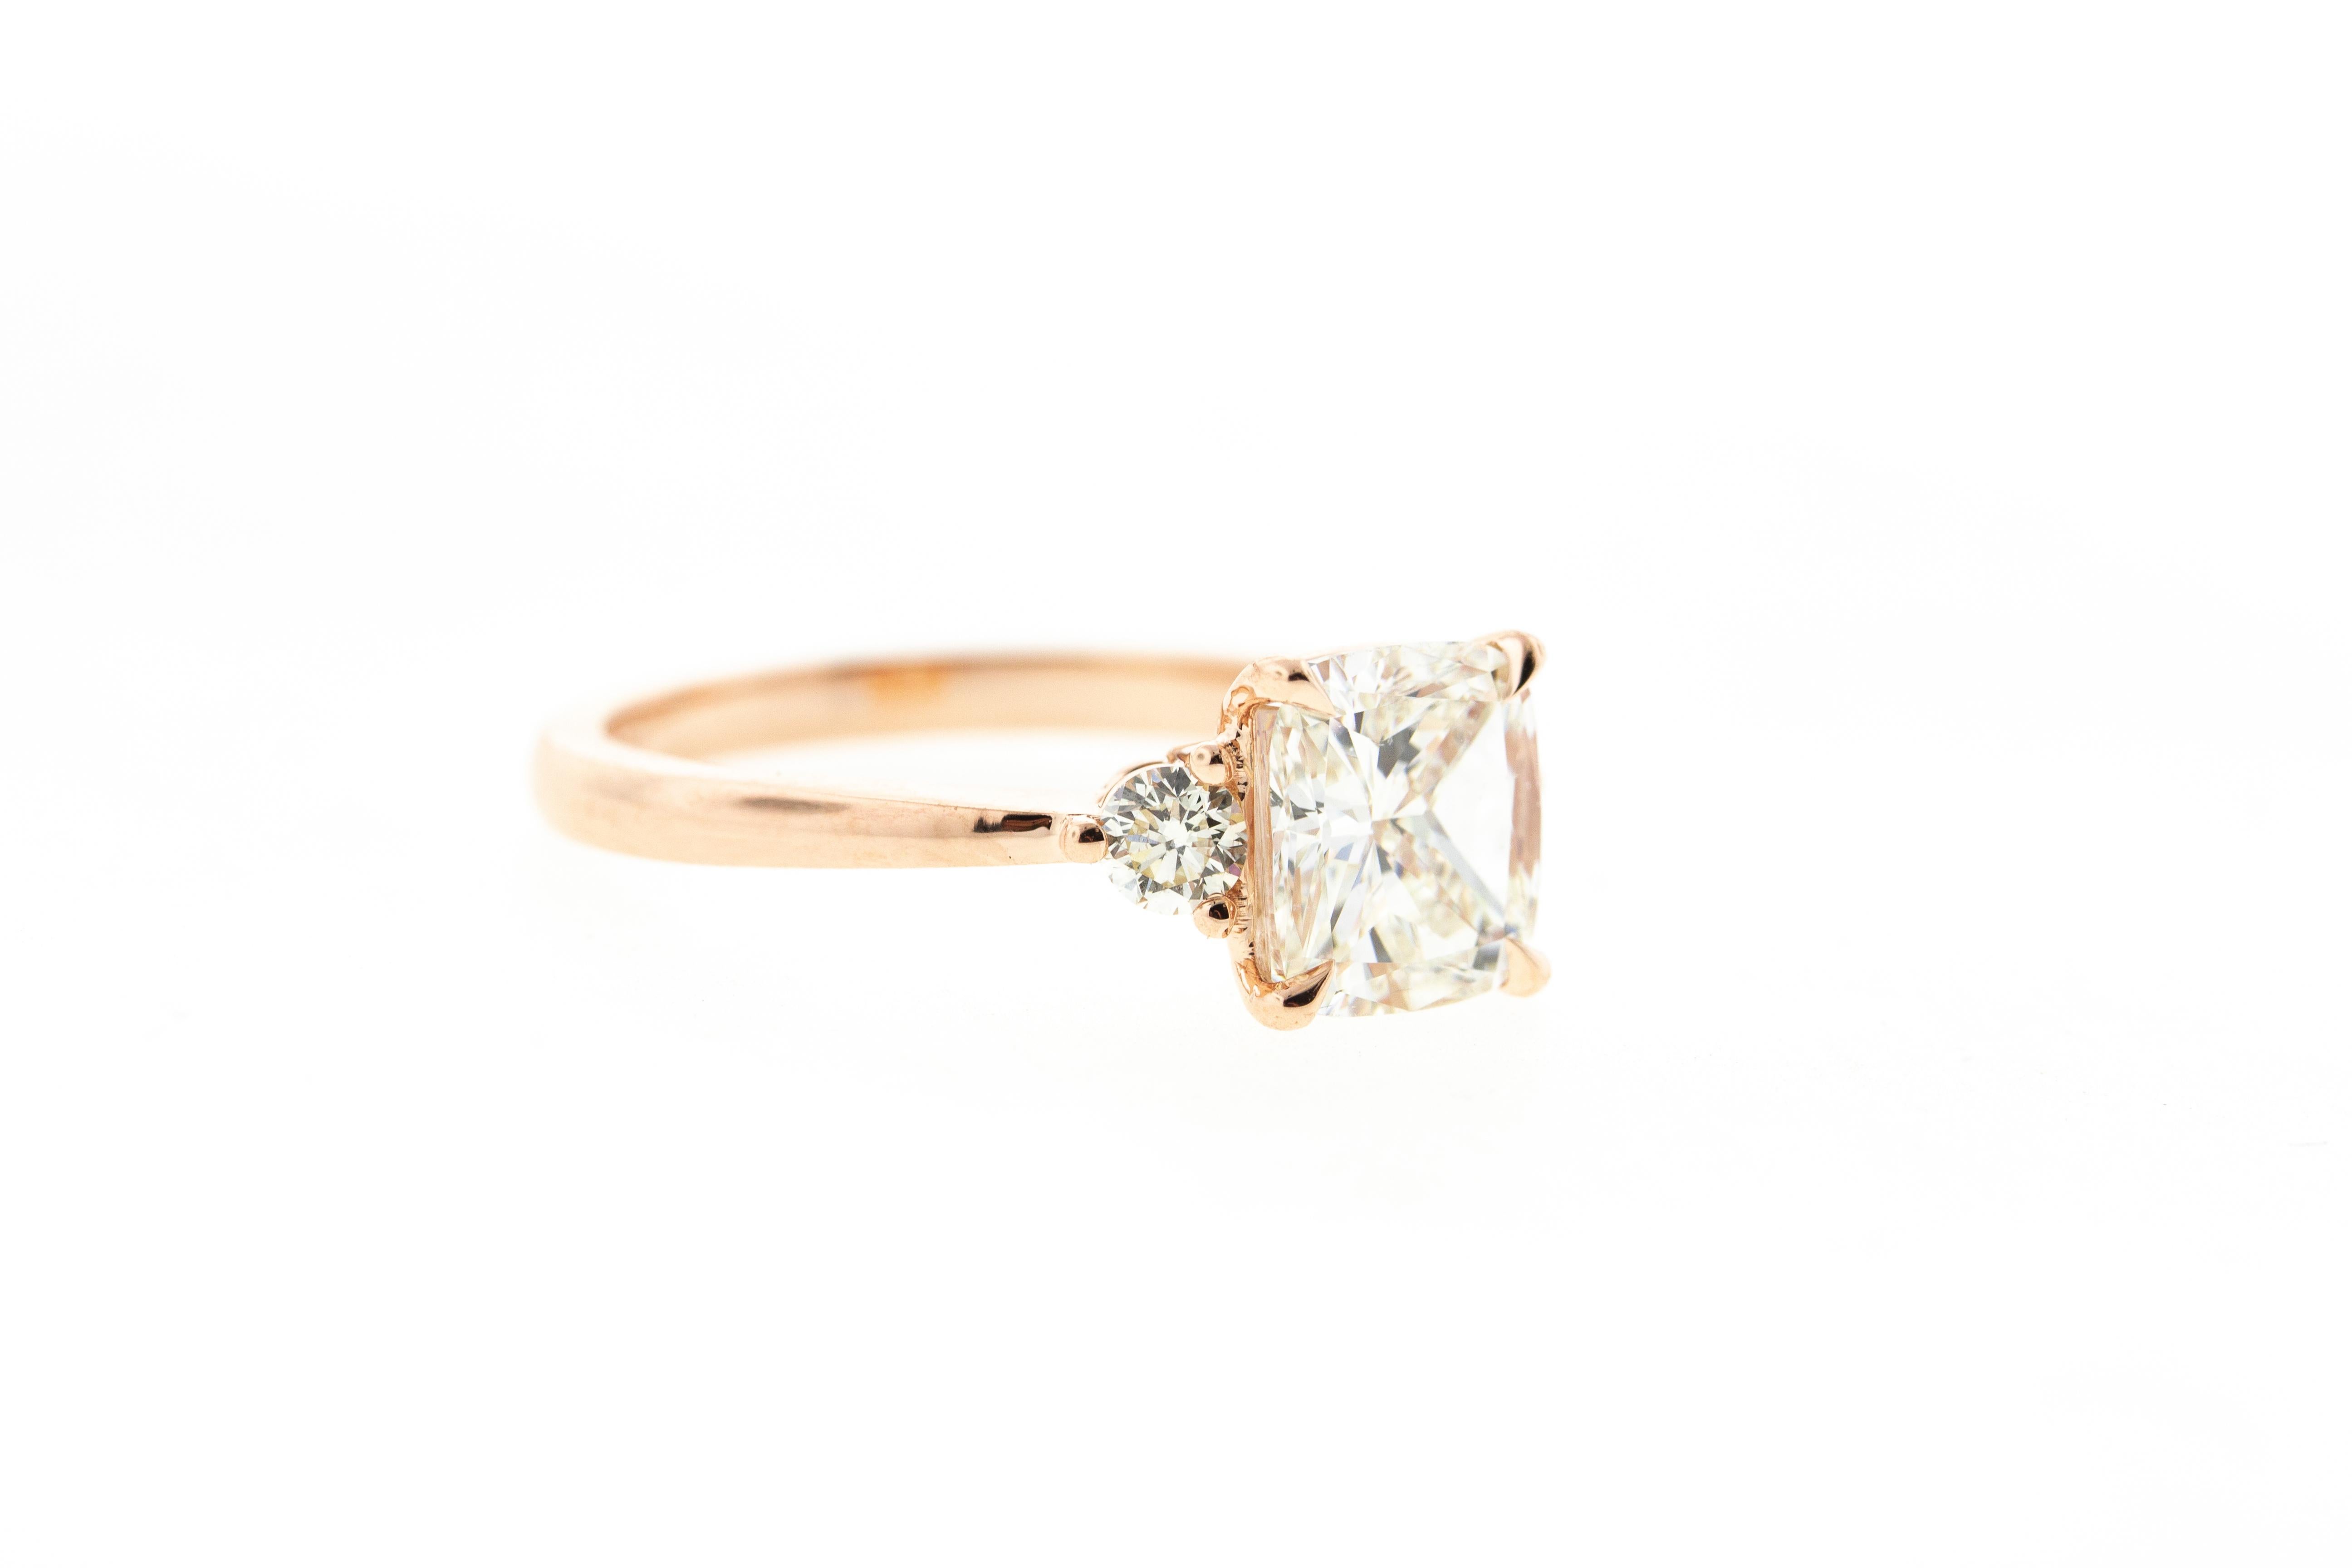 This Three Stone Cushion Cut diamond engagement ring is crafted in 14KT rose gold, and contains a Cushion shape Diamond (1.51 total carat weight, J color, VS2 clarity). With two side stones, a tapered shank and a raised profile, this ring is an